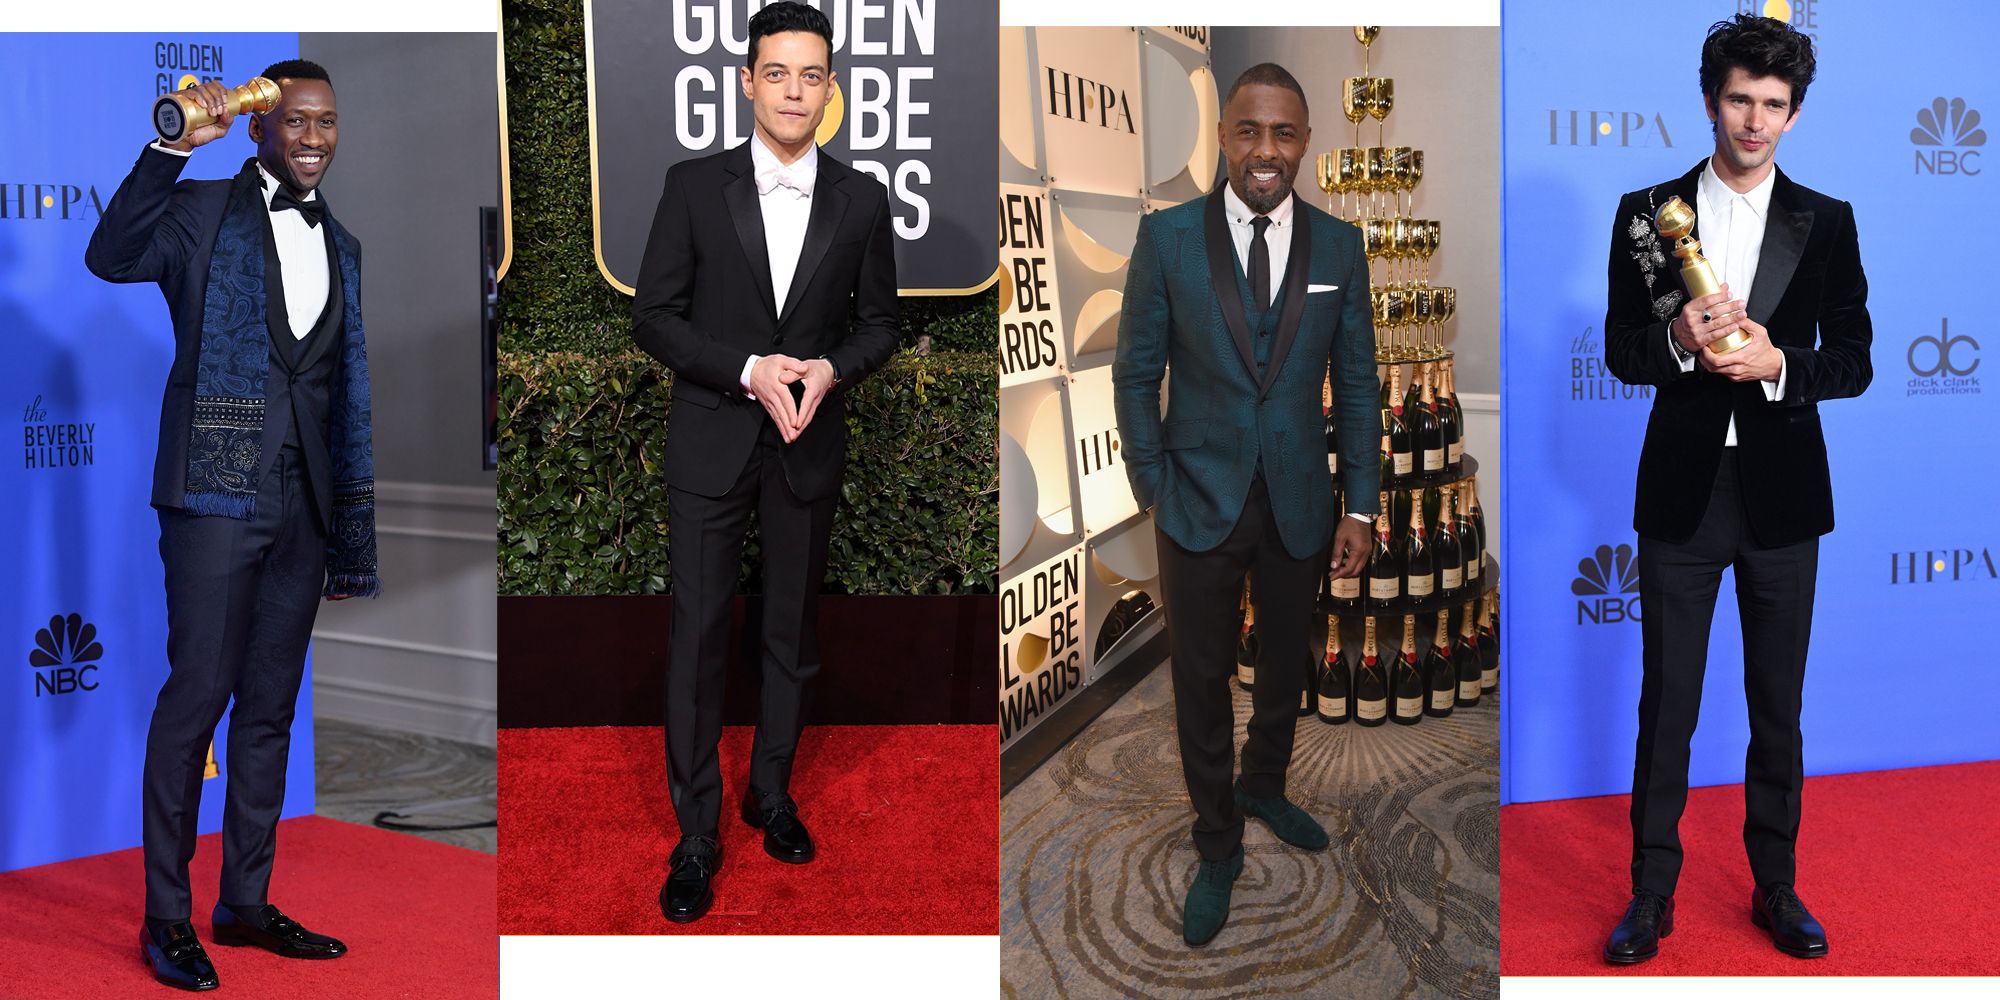 All The Best Dressed Men At The Golden Globes 2019